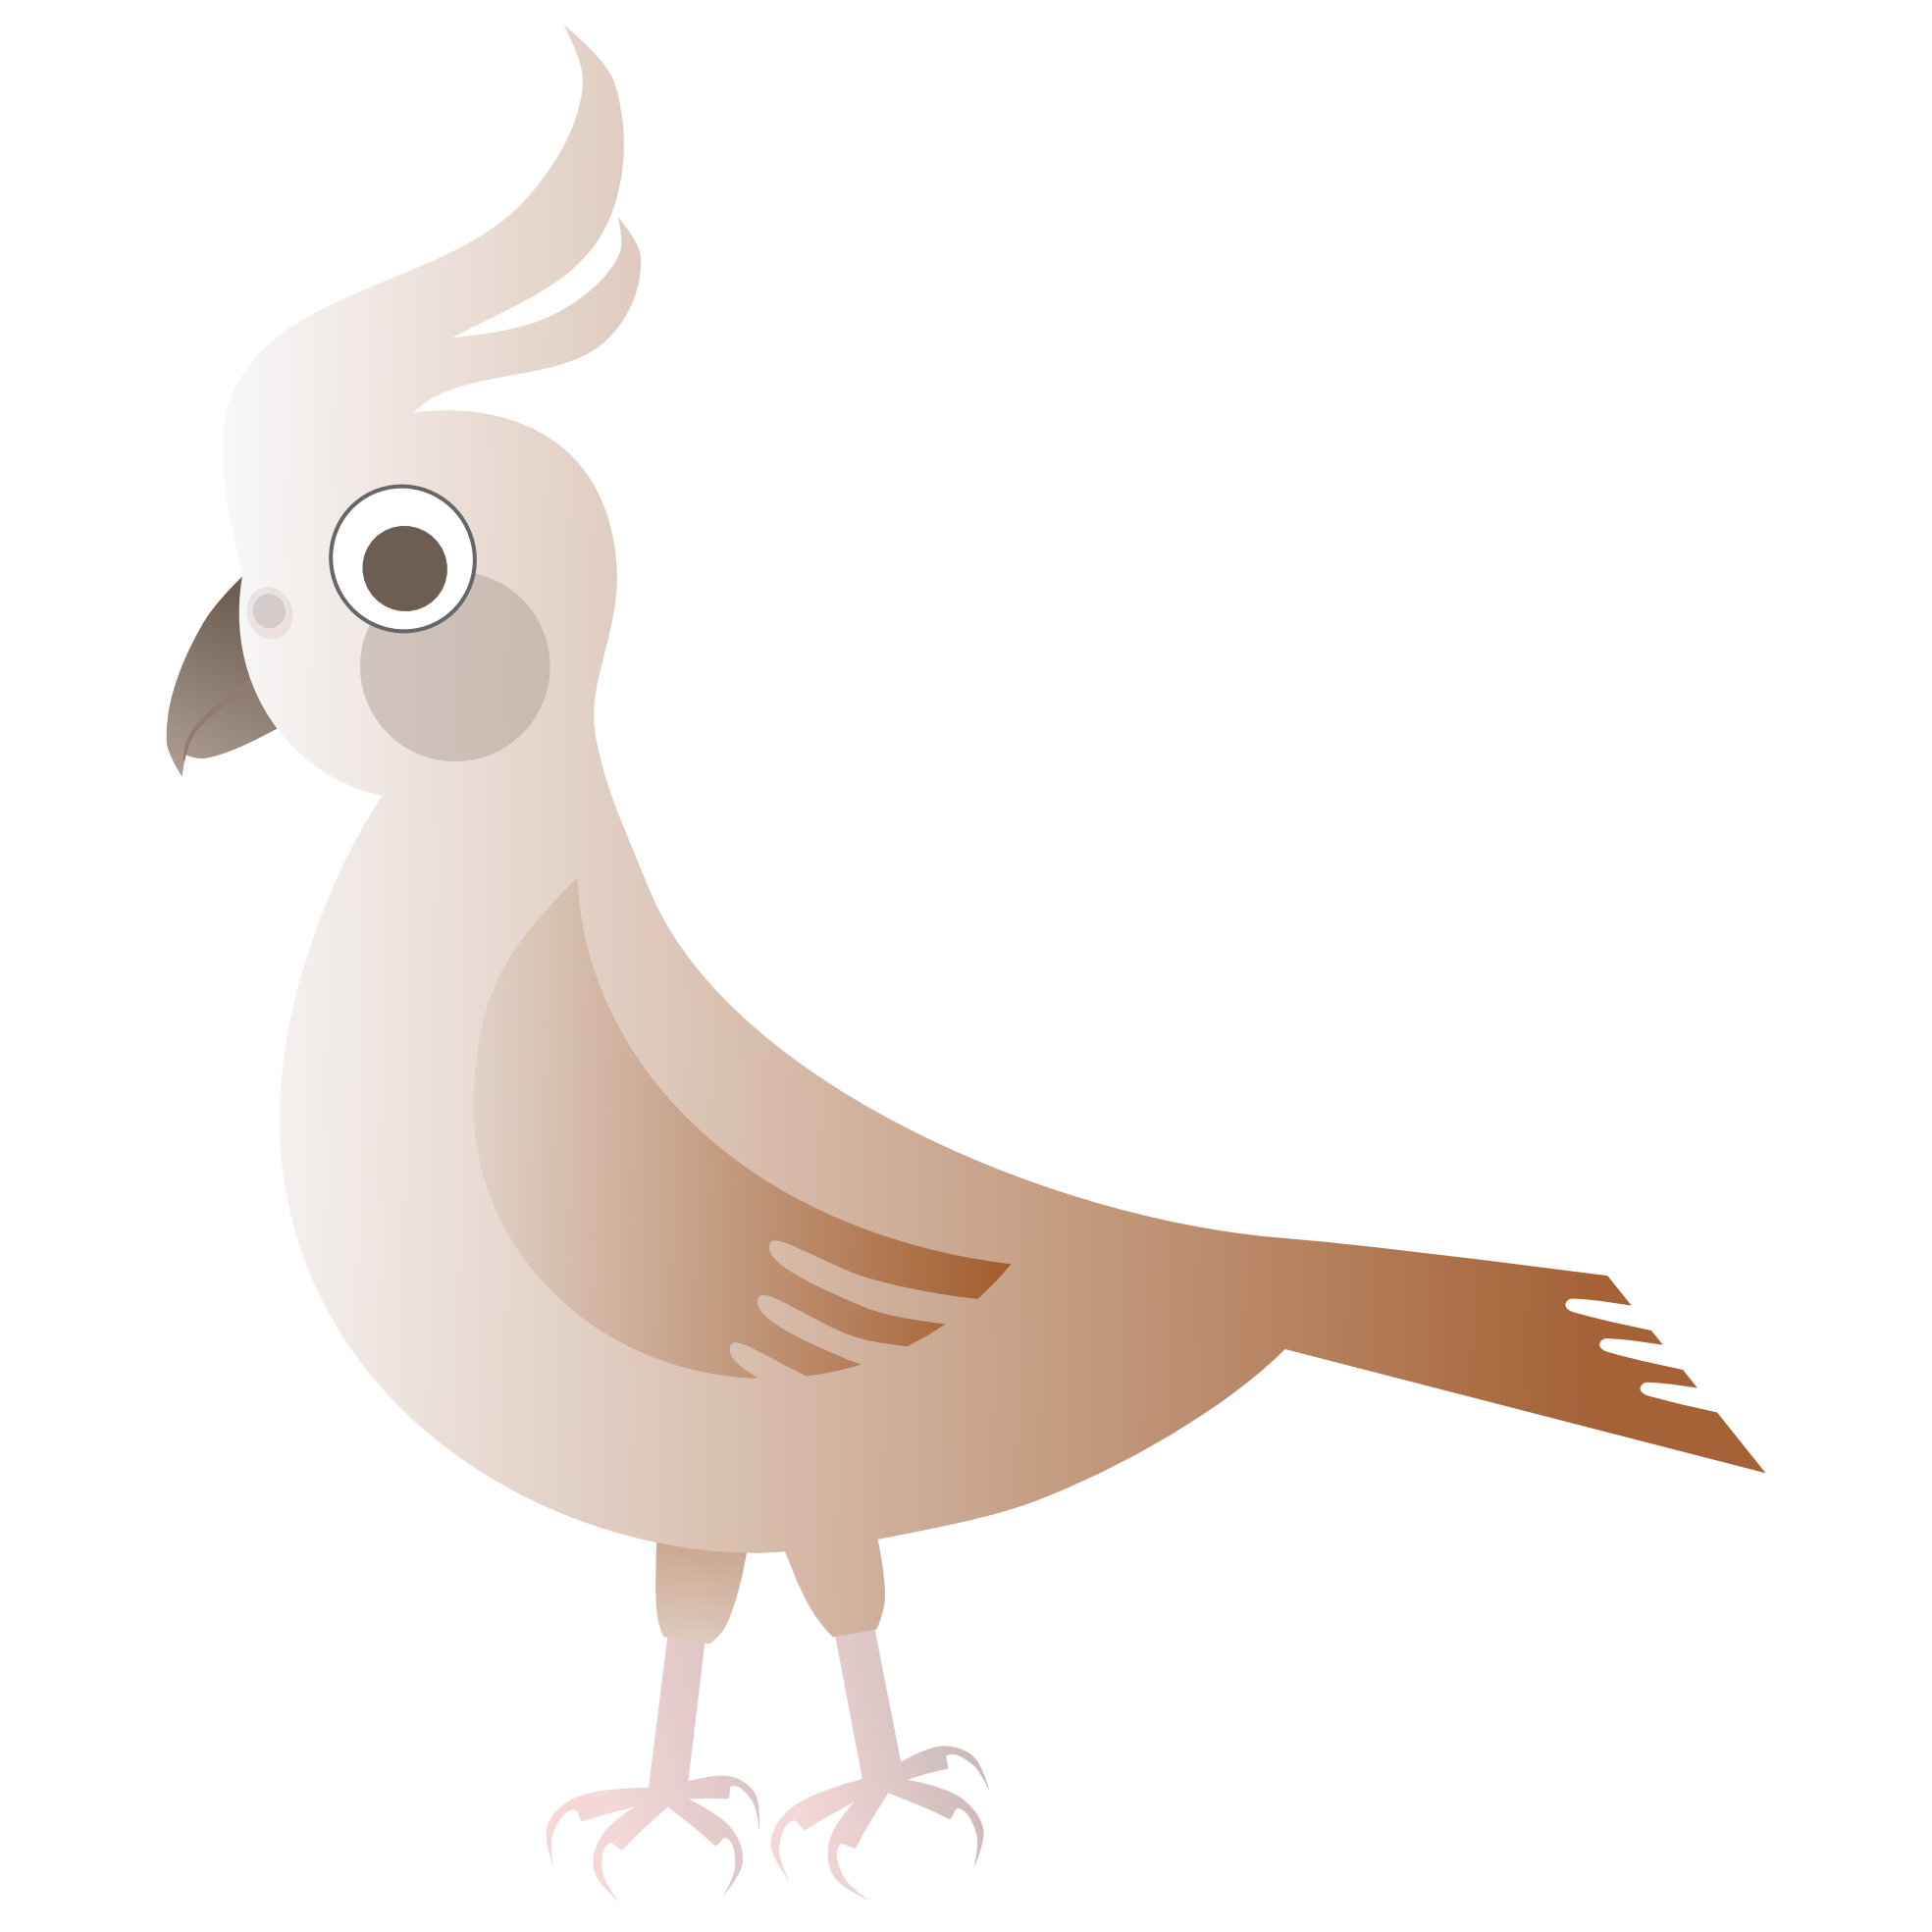 Doves clipart abstract. Clipartist net clip art